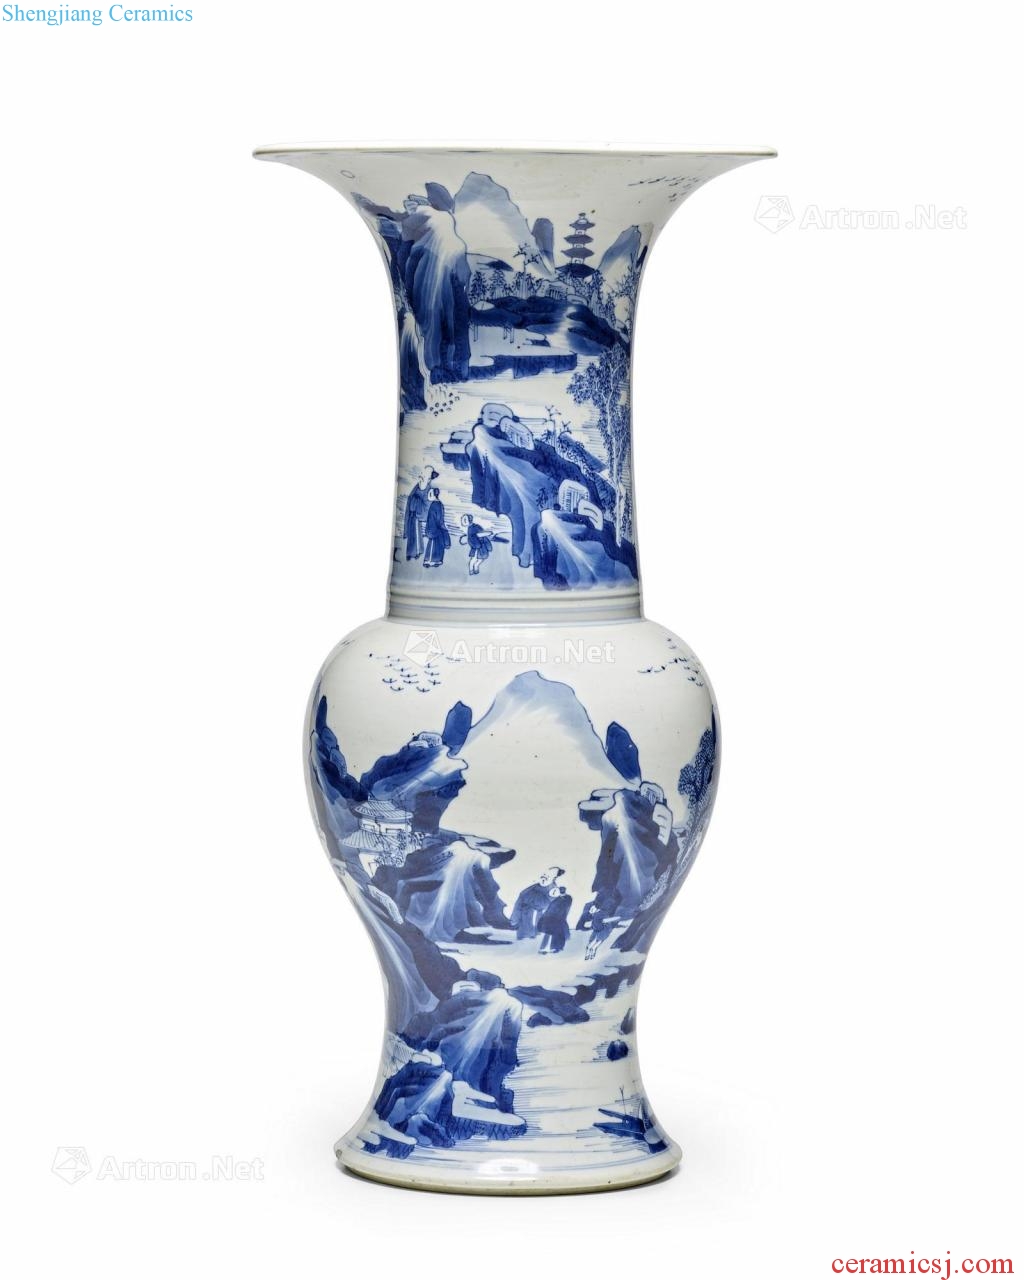 In the 19th century Blue and white figure ombre honour family was visiting friends with jean